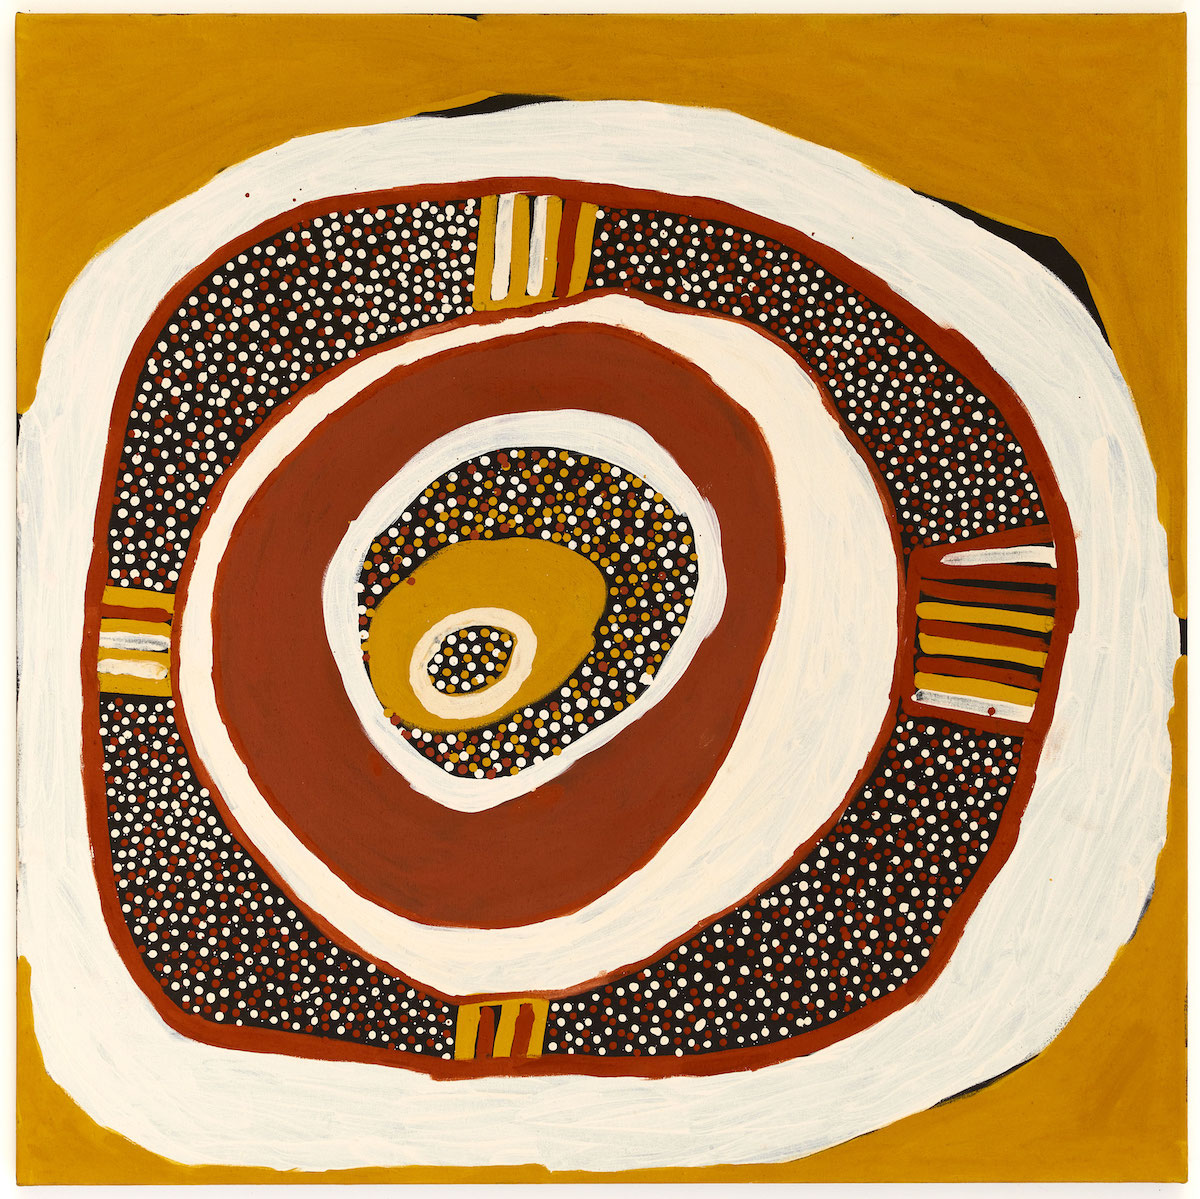 Abstract painting of organic circles, lines and dots in cream, red, yellow ochre and black.